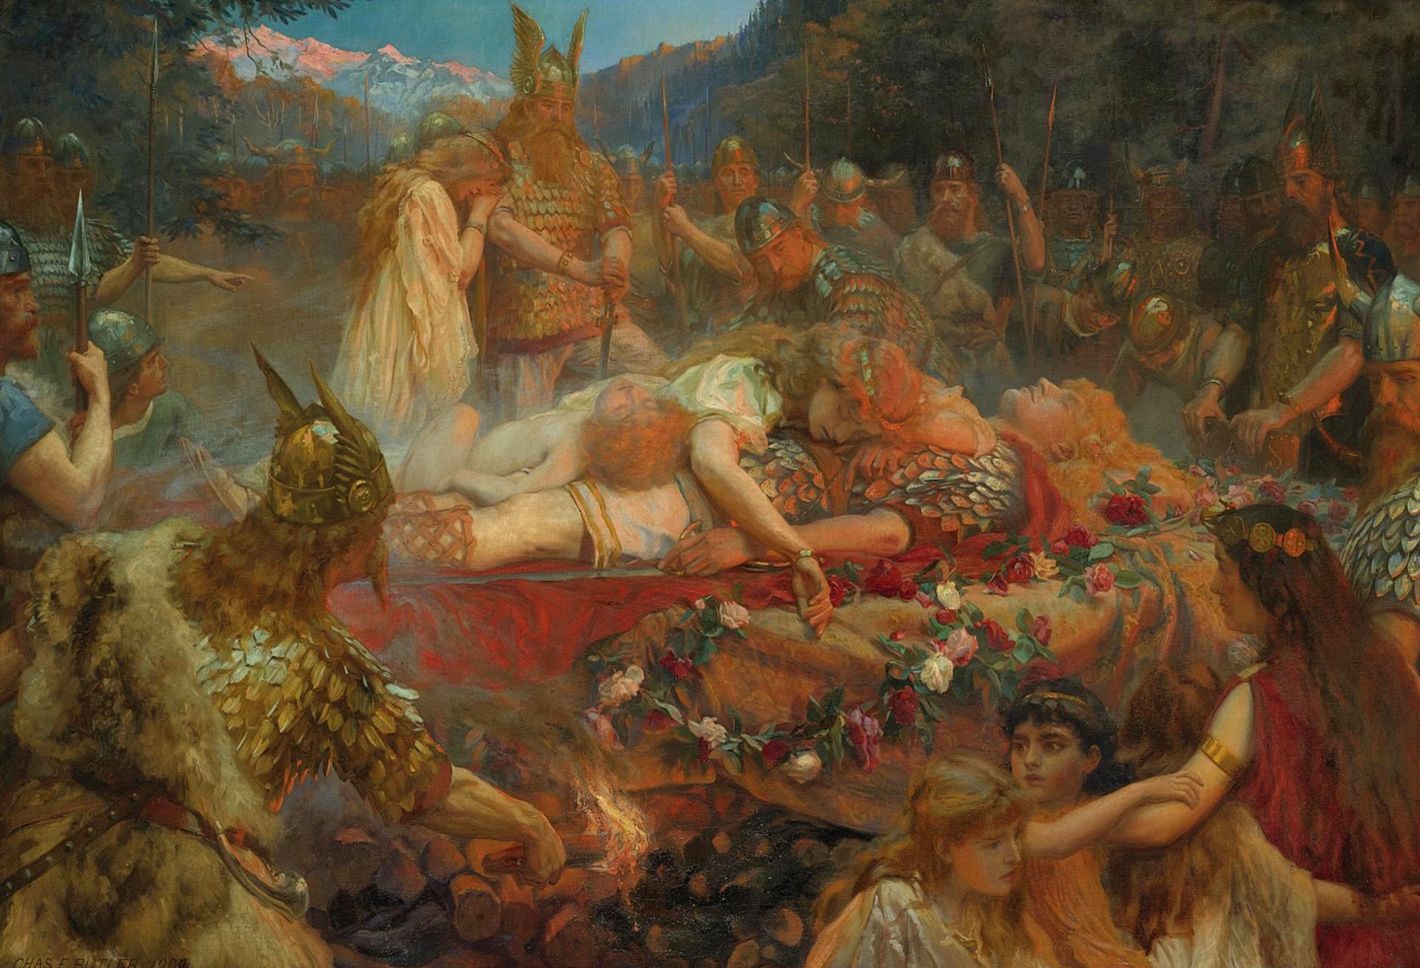 "Sigurd and Brunhild's Funeral Pyre" by Charles E Butler, 1909, retrieved from https://i.pinimg.com/originals/b9/f2/39/b9f2395f1bc9760d1b3b9c7ca0156723.jpg--Viking Dragon Blogs